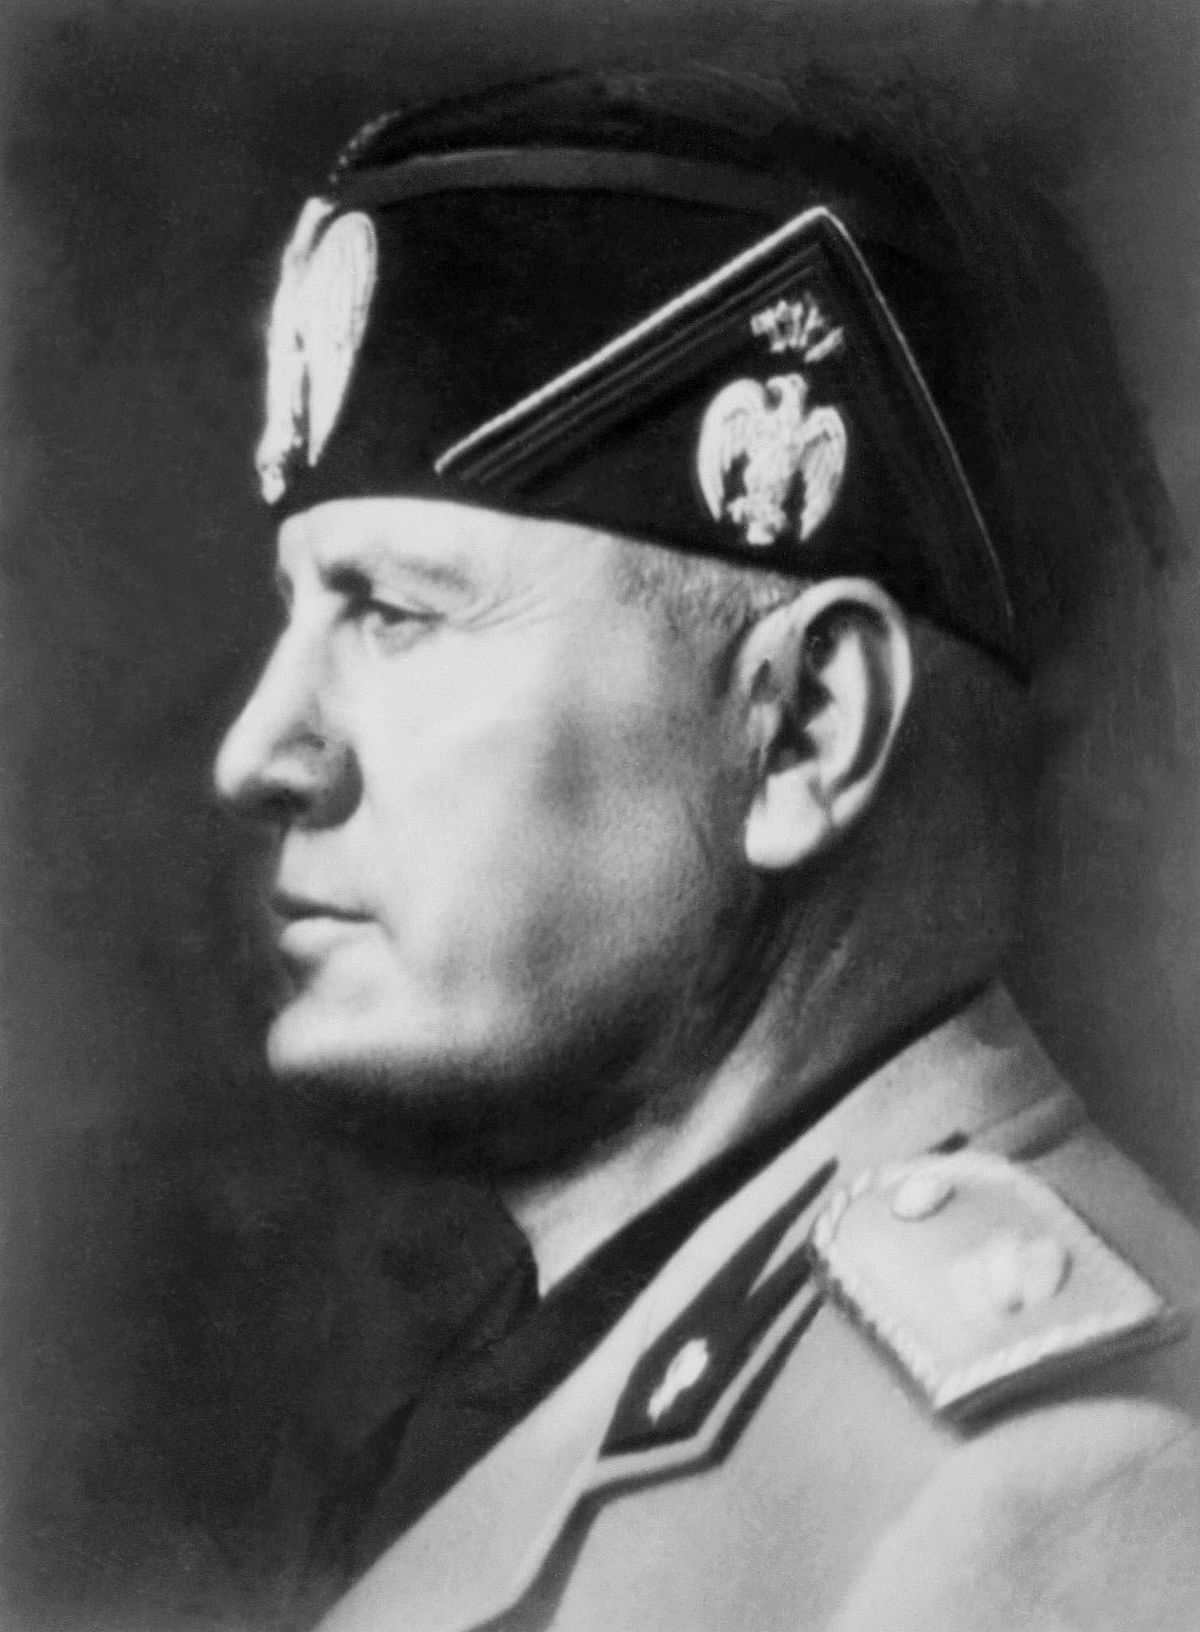 Undated portrait of Benito Mussolini, known as Duce, who ruled Italy from 1923 to 1945. Photo: AFP